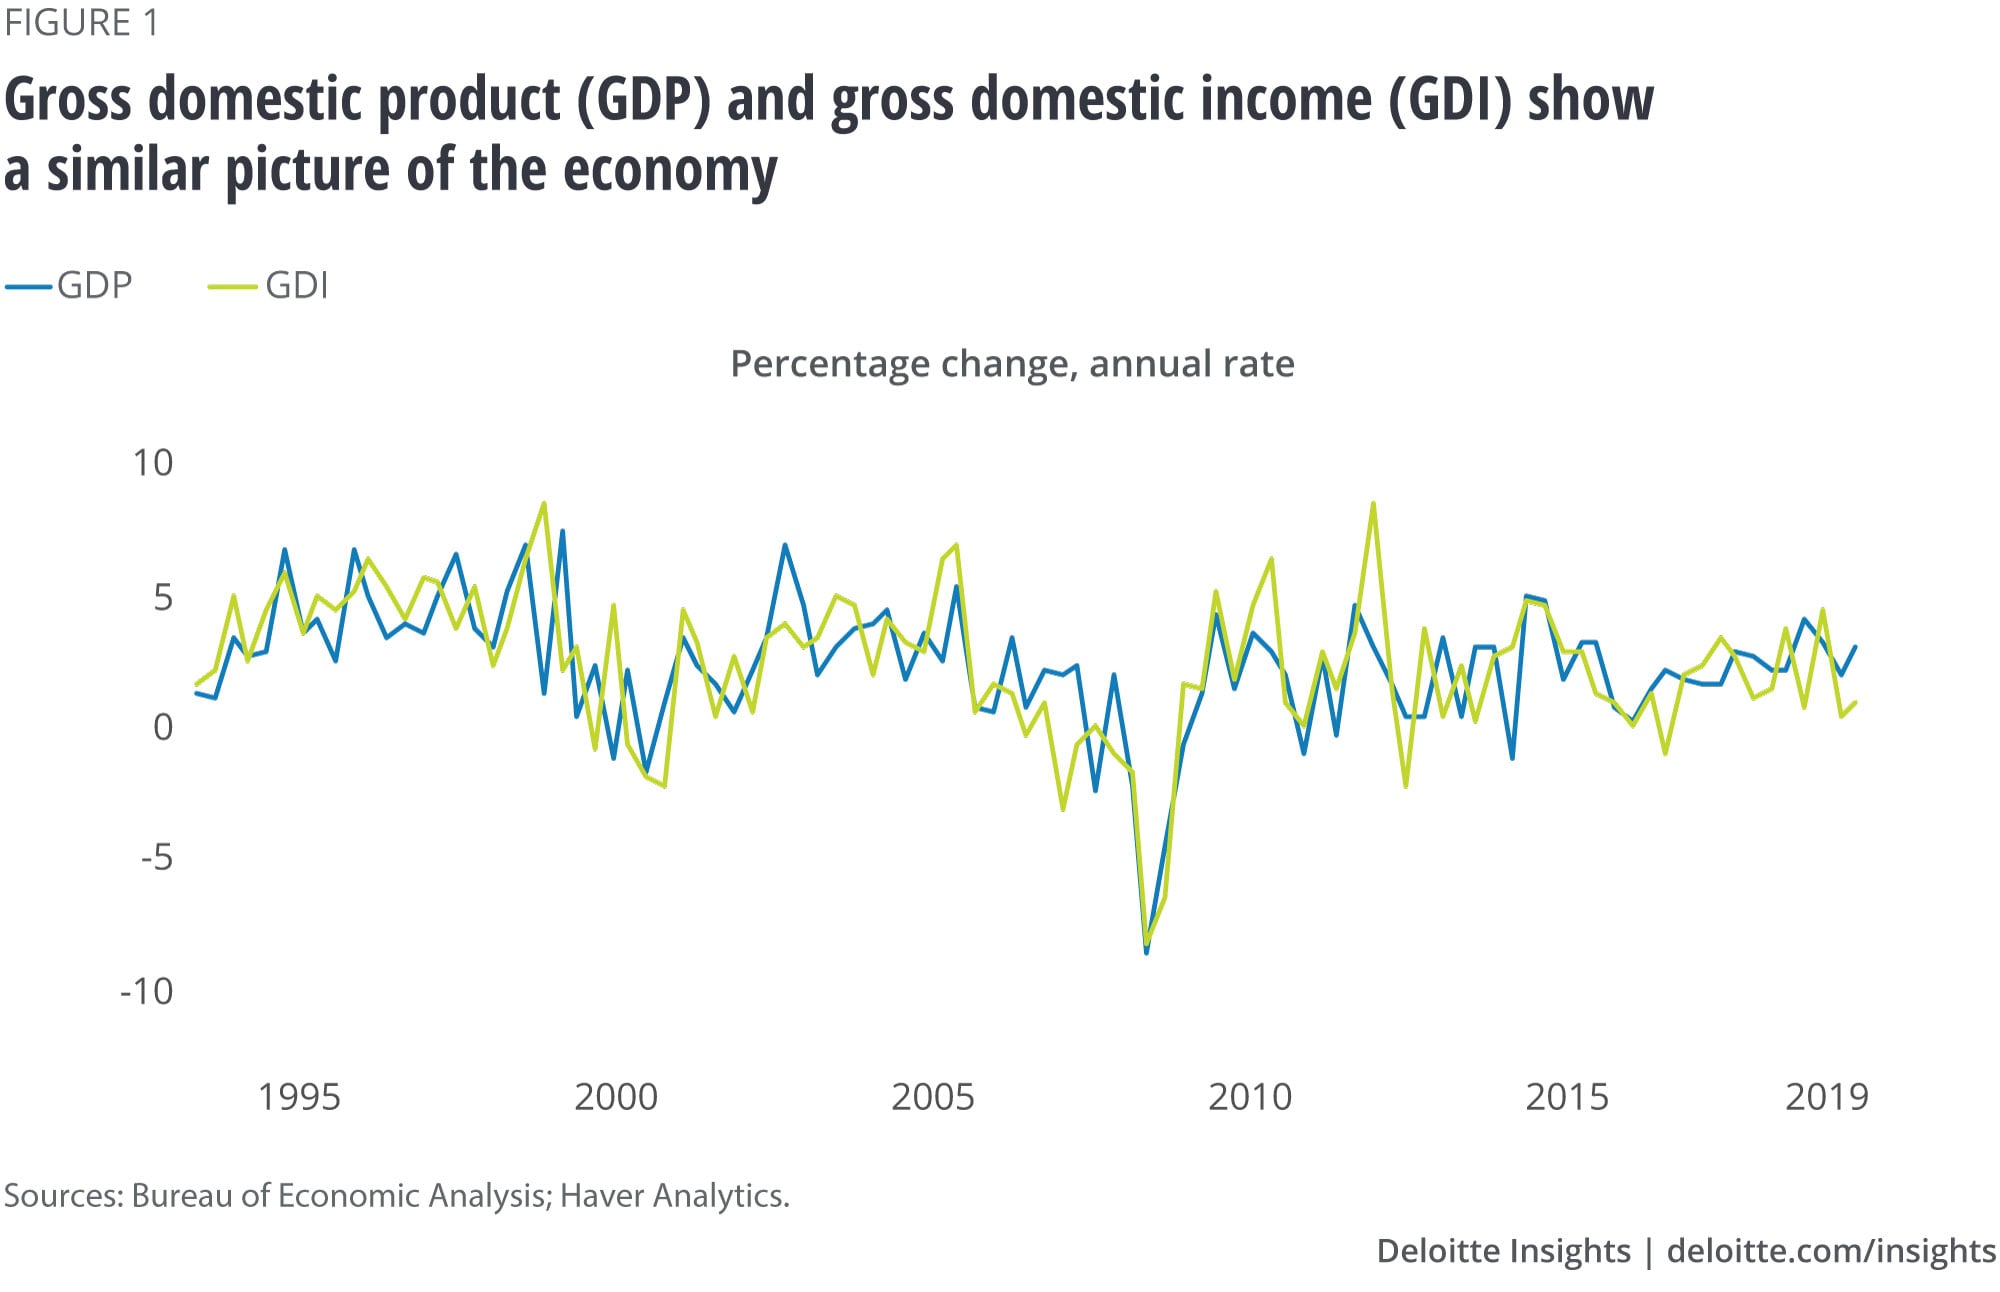 Gross domestic product (GDP) and gross domestic income (GDI) show a similar picture of the economy